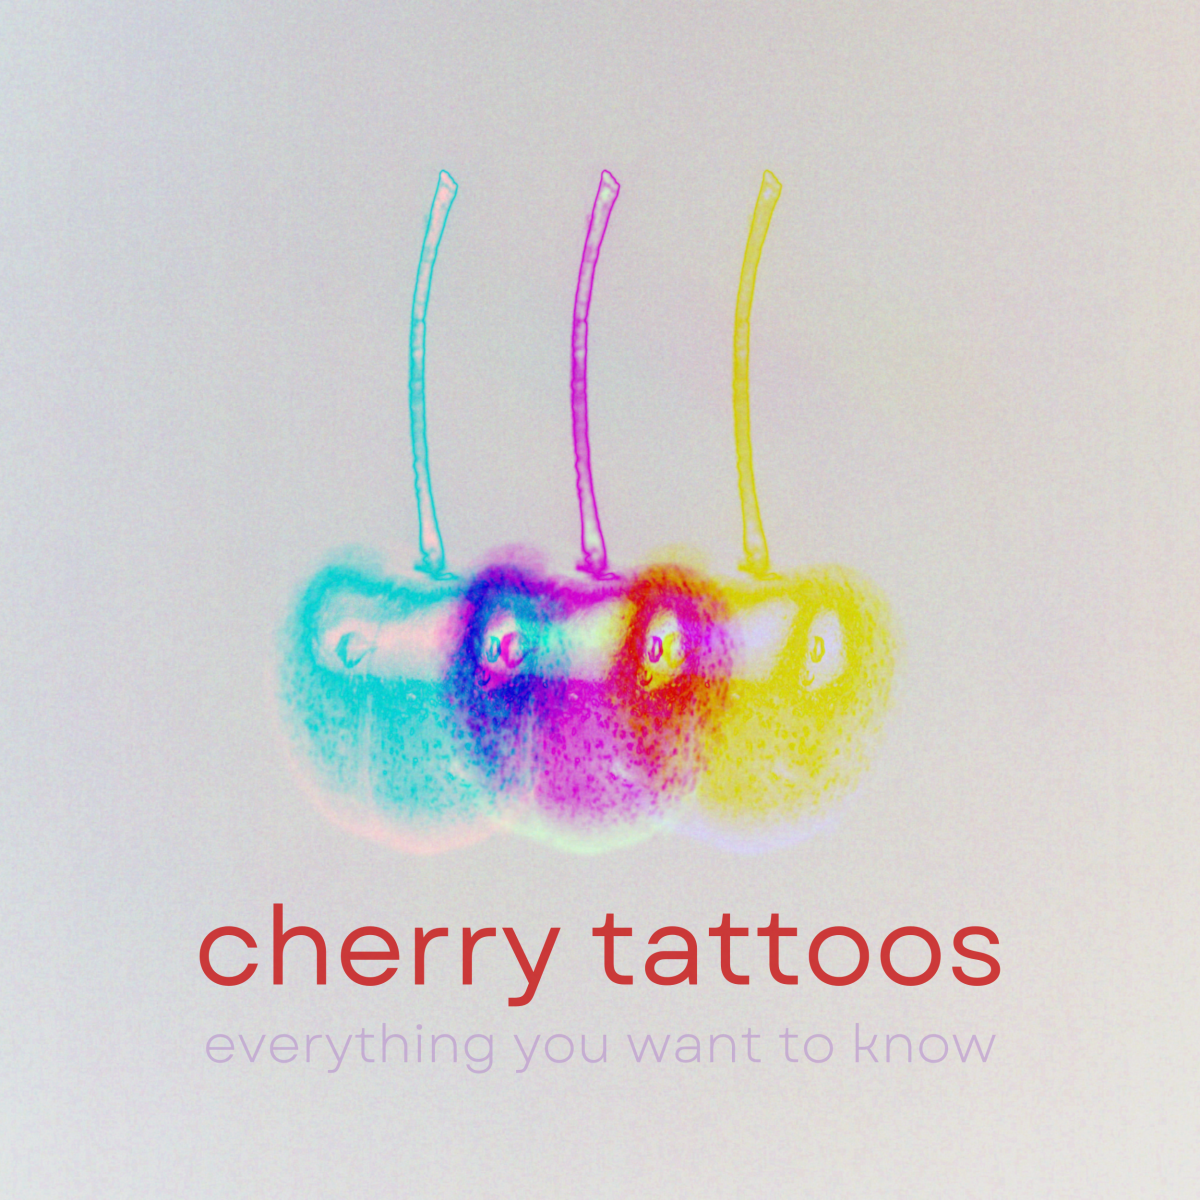 Everything you want to know about cherry tattoos.